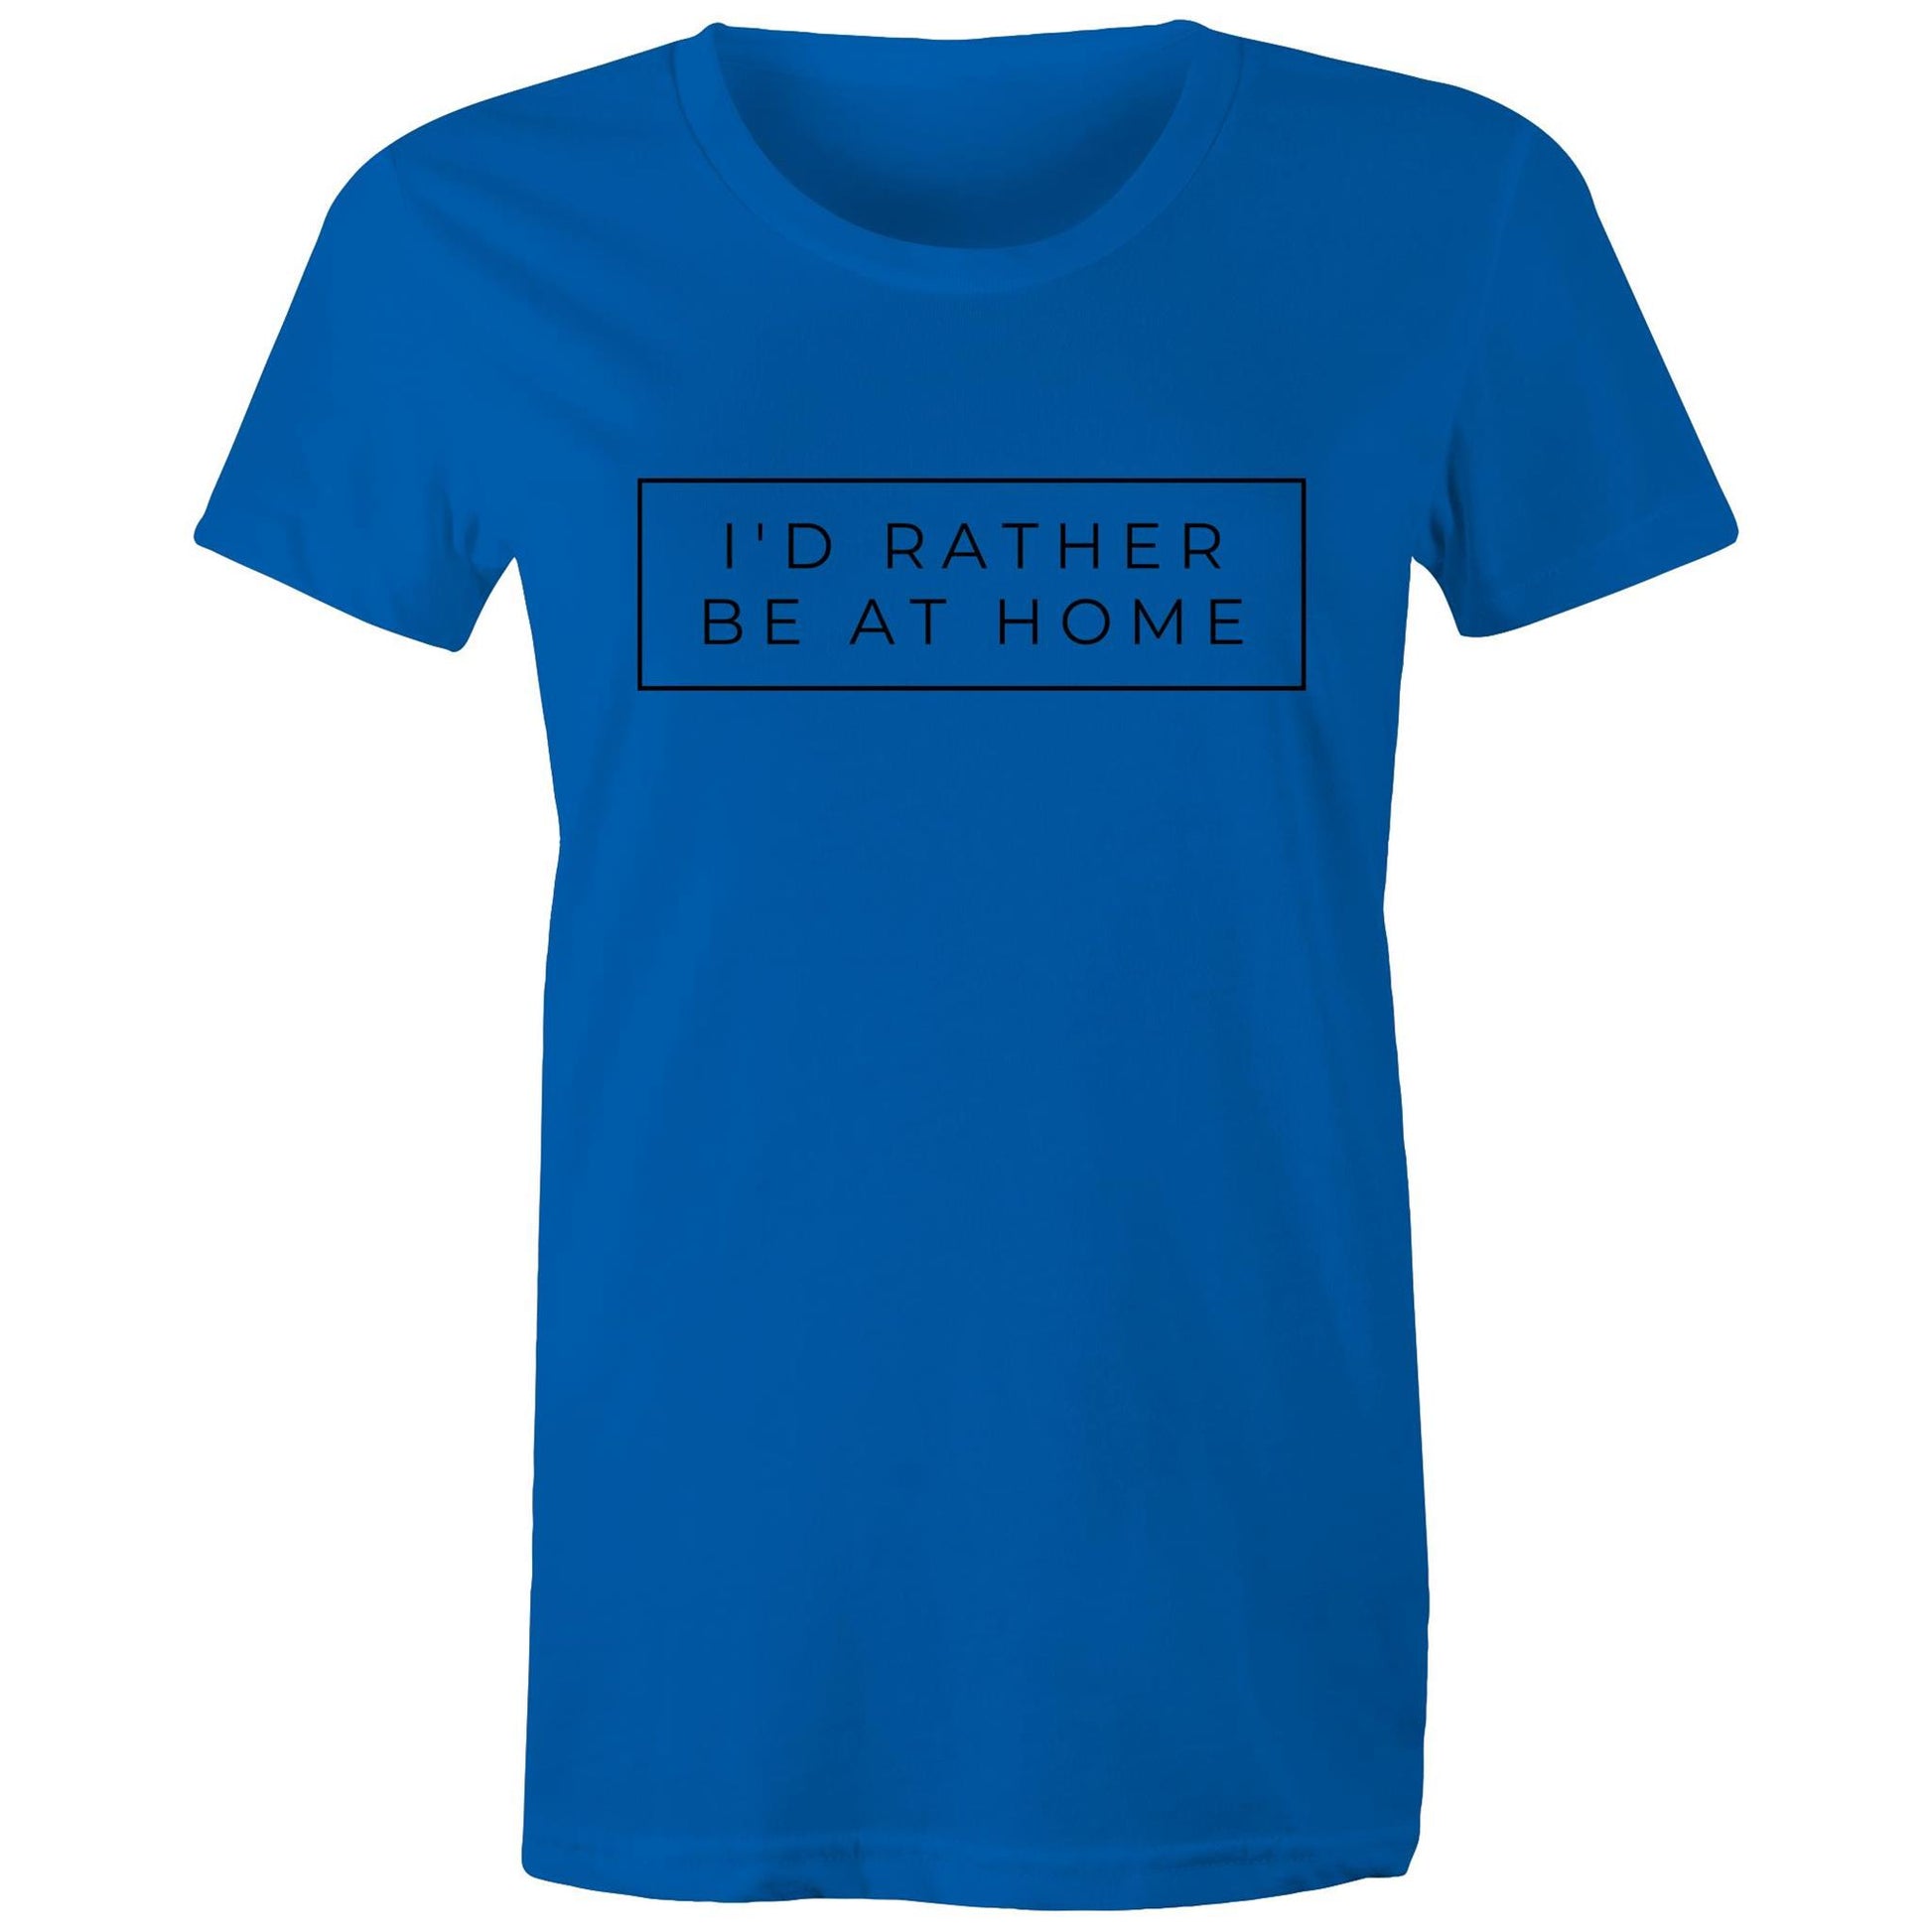 I'd Rather Be At Home - Womens T-shirt Bright Royal Womens T-shirt home